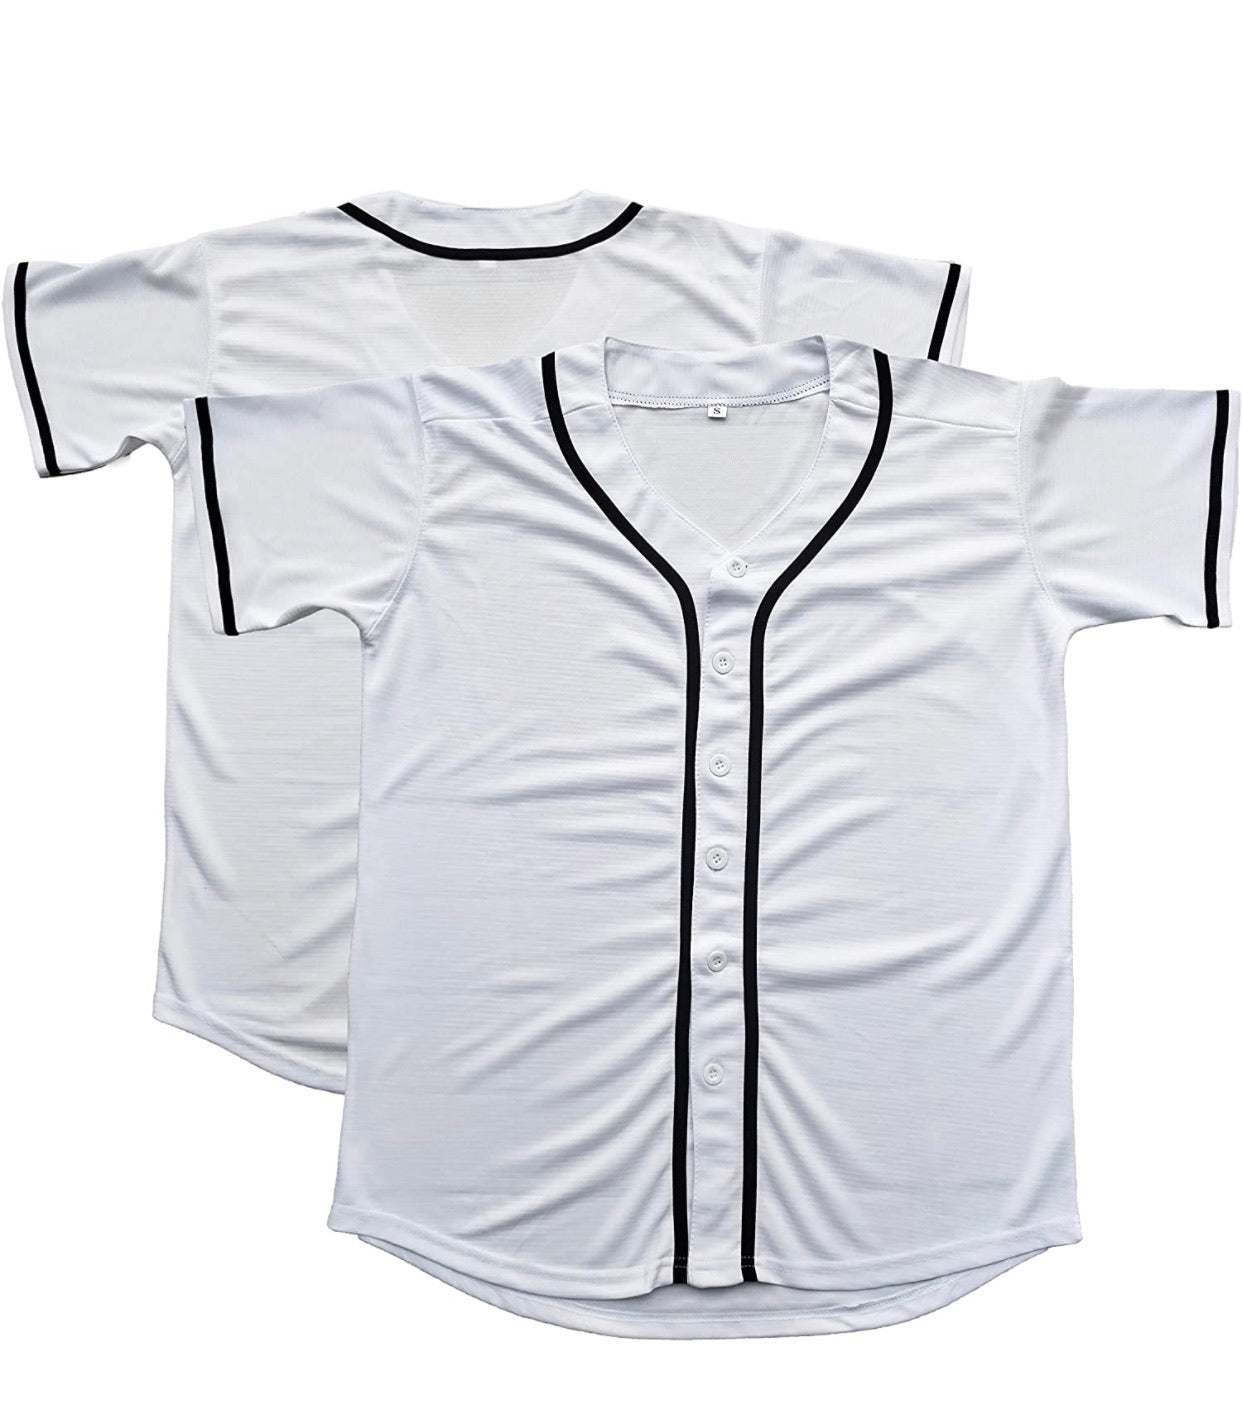 We Sub’N ️ Sublimation Baseball jersey(mesh) with Black Piping adultxxxl